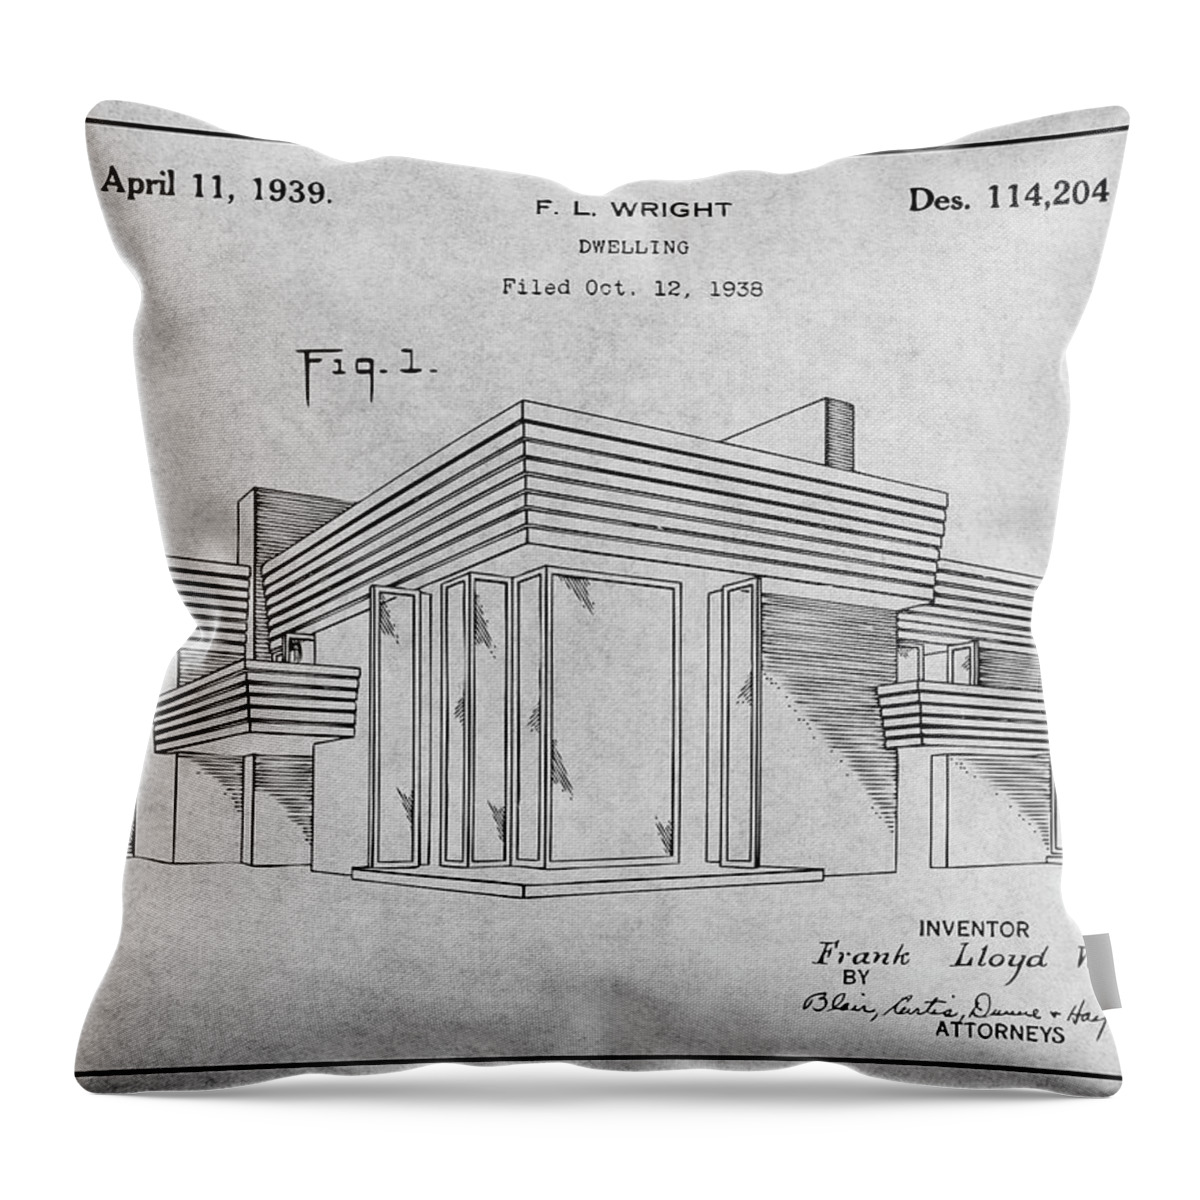 1938 Frank Lloyd Wright House Dwelling Patent Print Throw Pillow featuring the drawing 1938 Frank Lloyd Wright House Dwelling Gray Patent Print by Greg Edwards